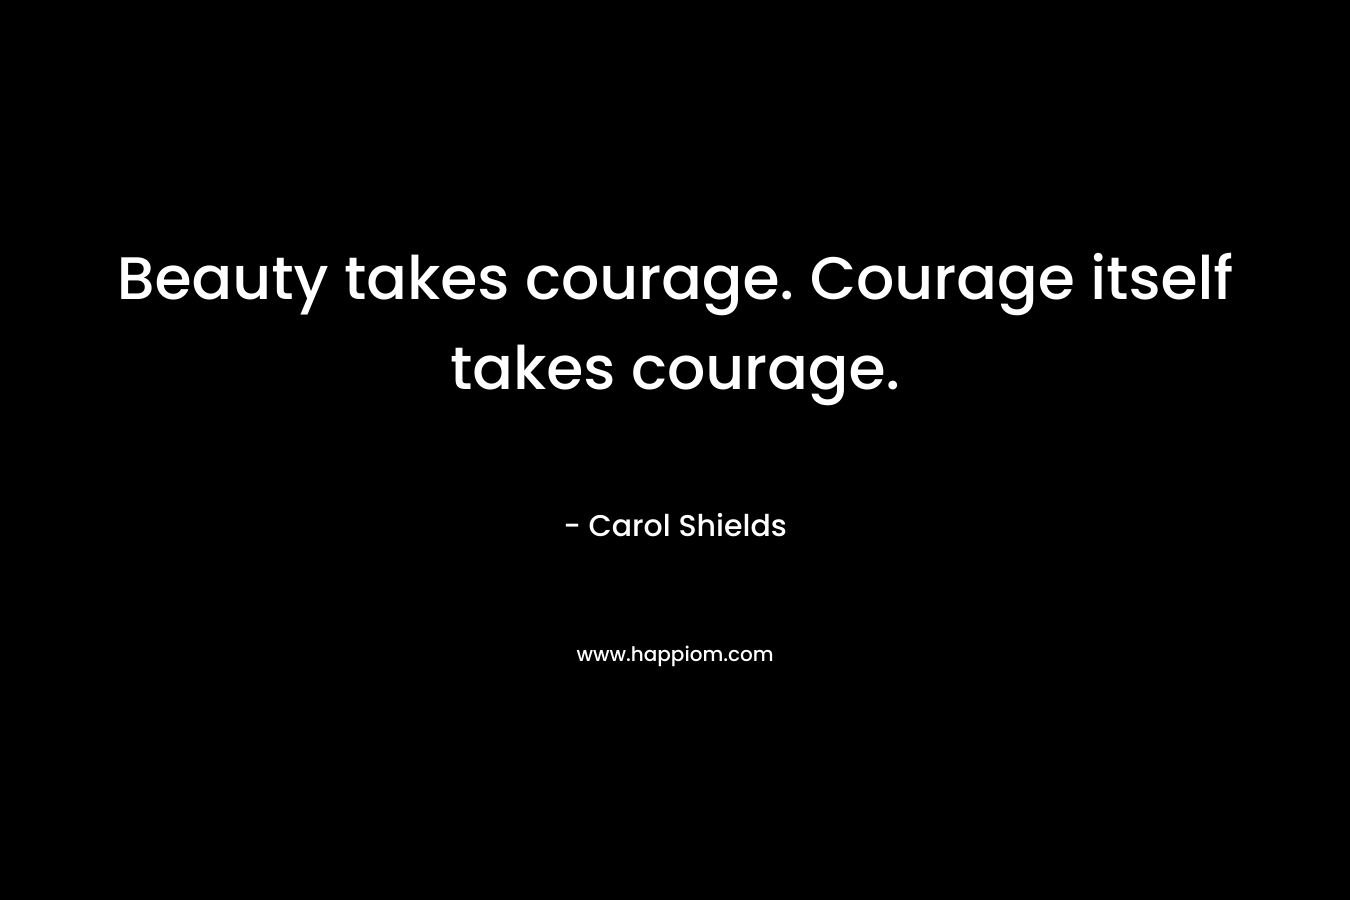 Beauty takes courage. Courage itself takes courage.